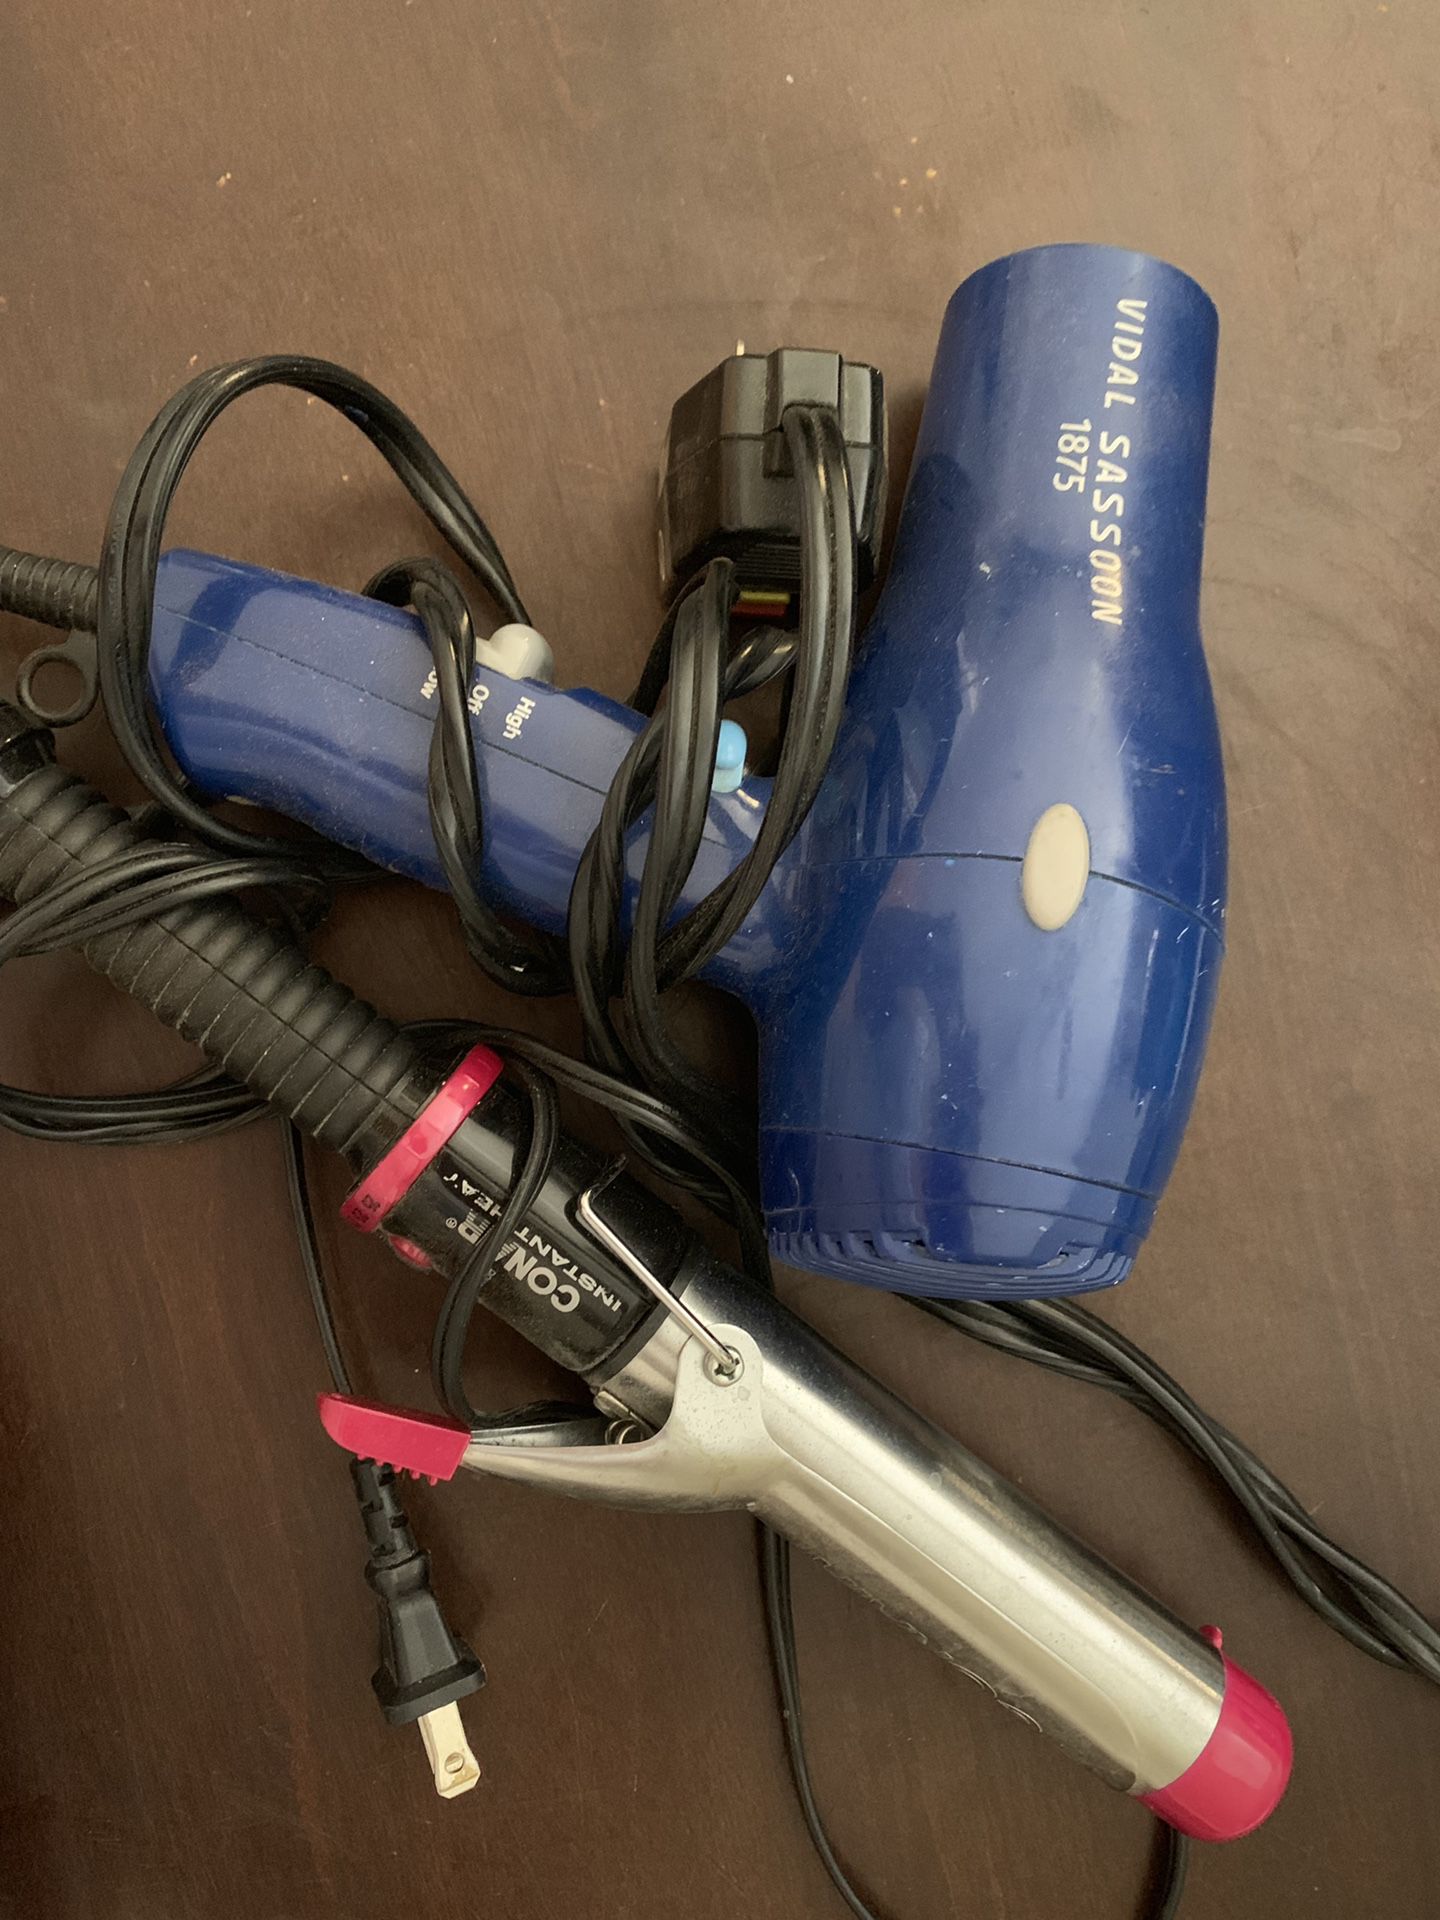 Curler and hair dryer